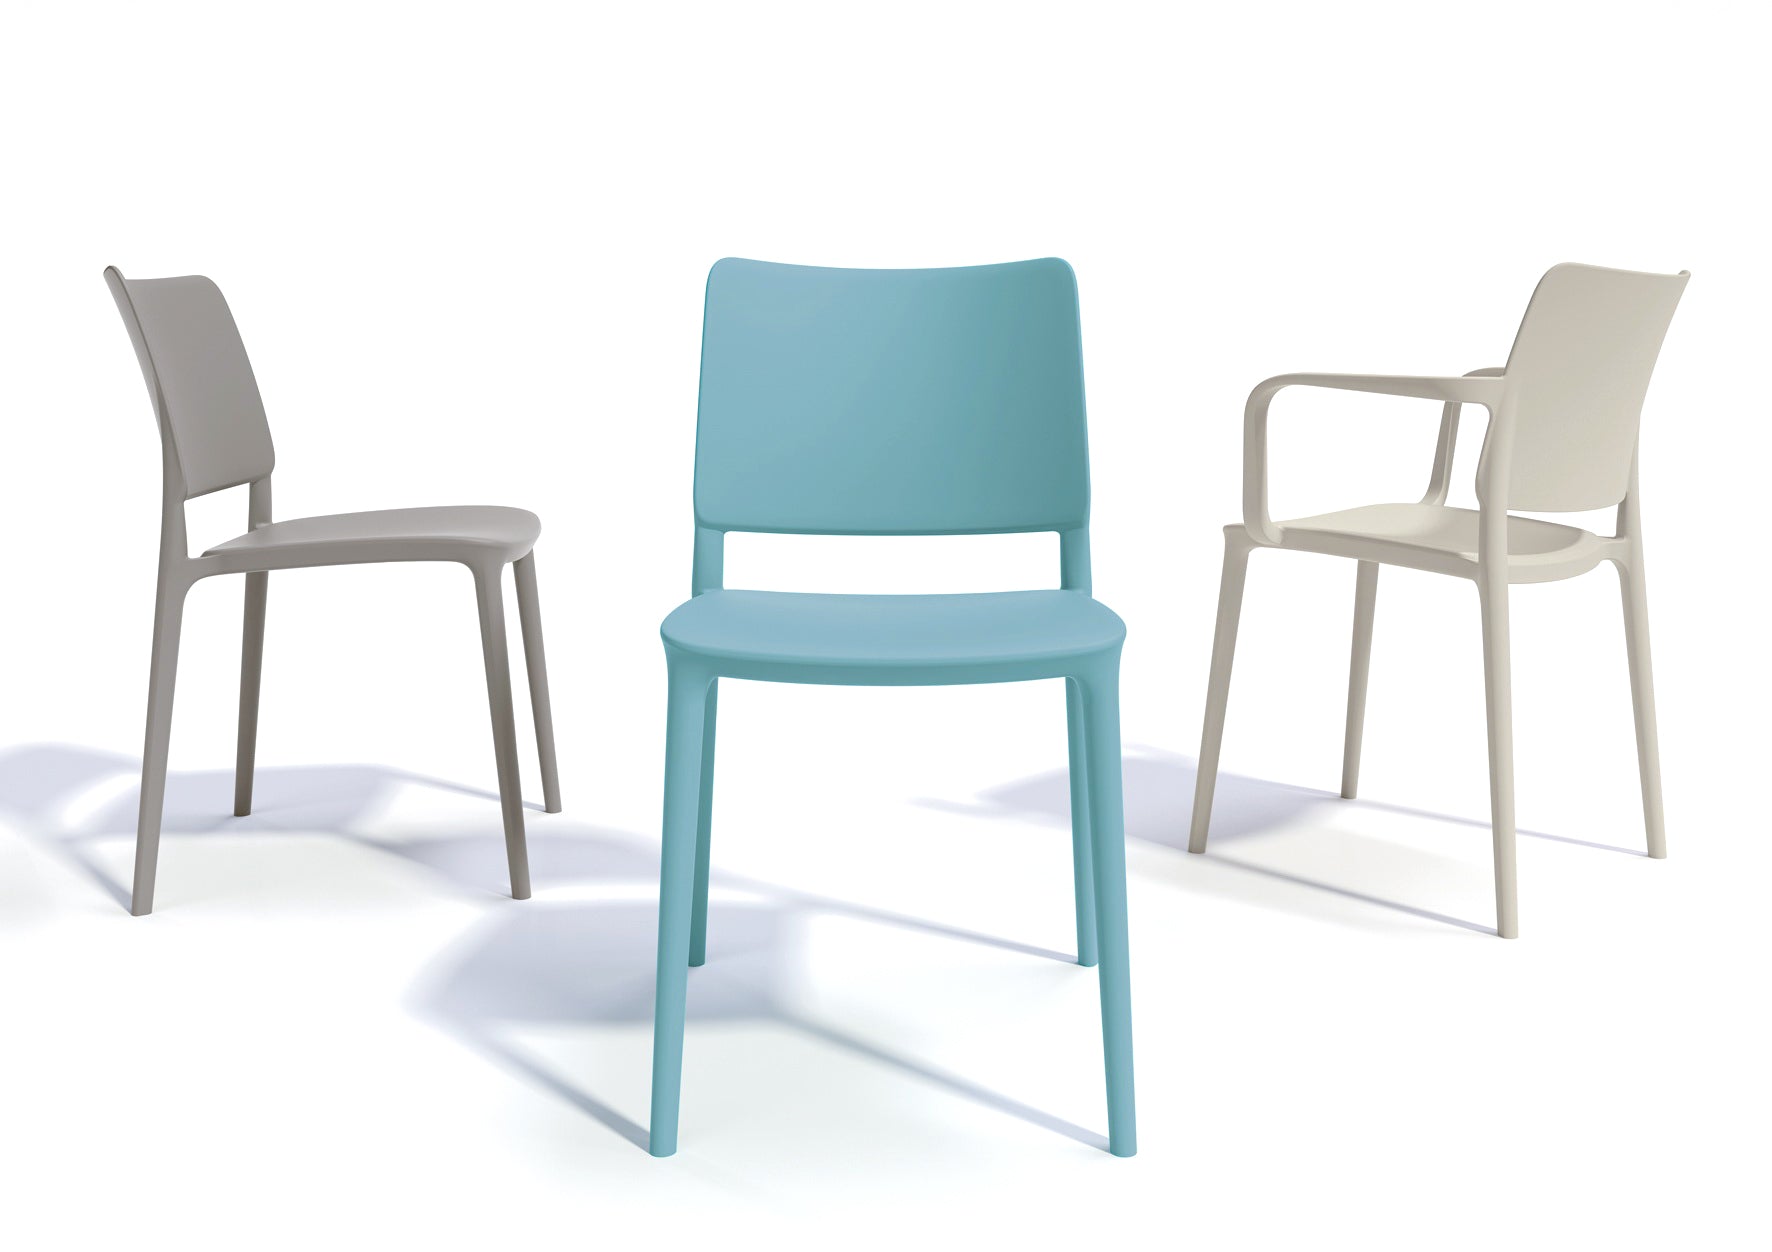 Cleo Patio Dining Chair in Aqua Blue - (Set of 2)